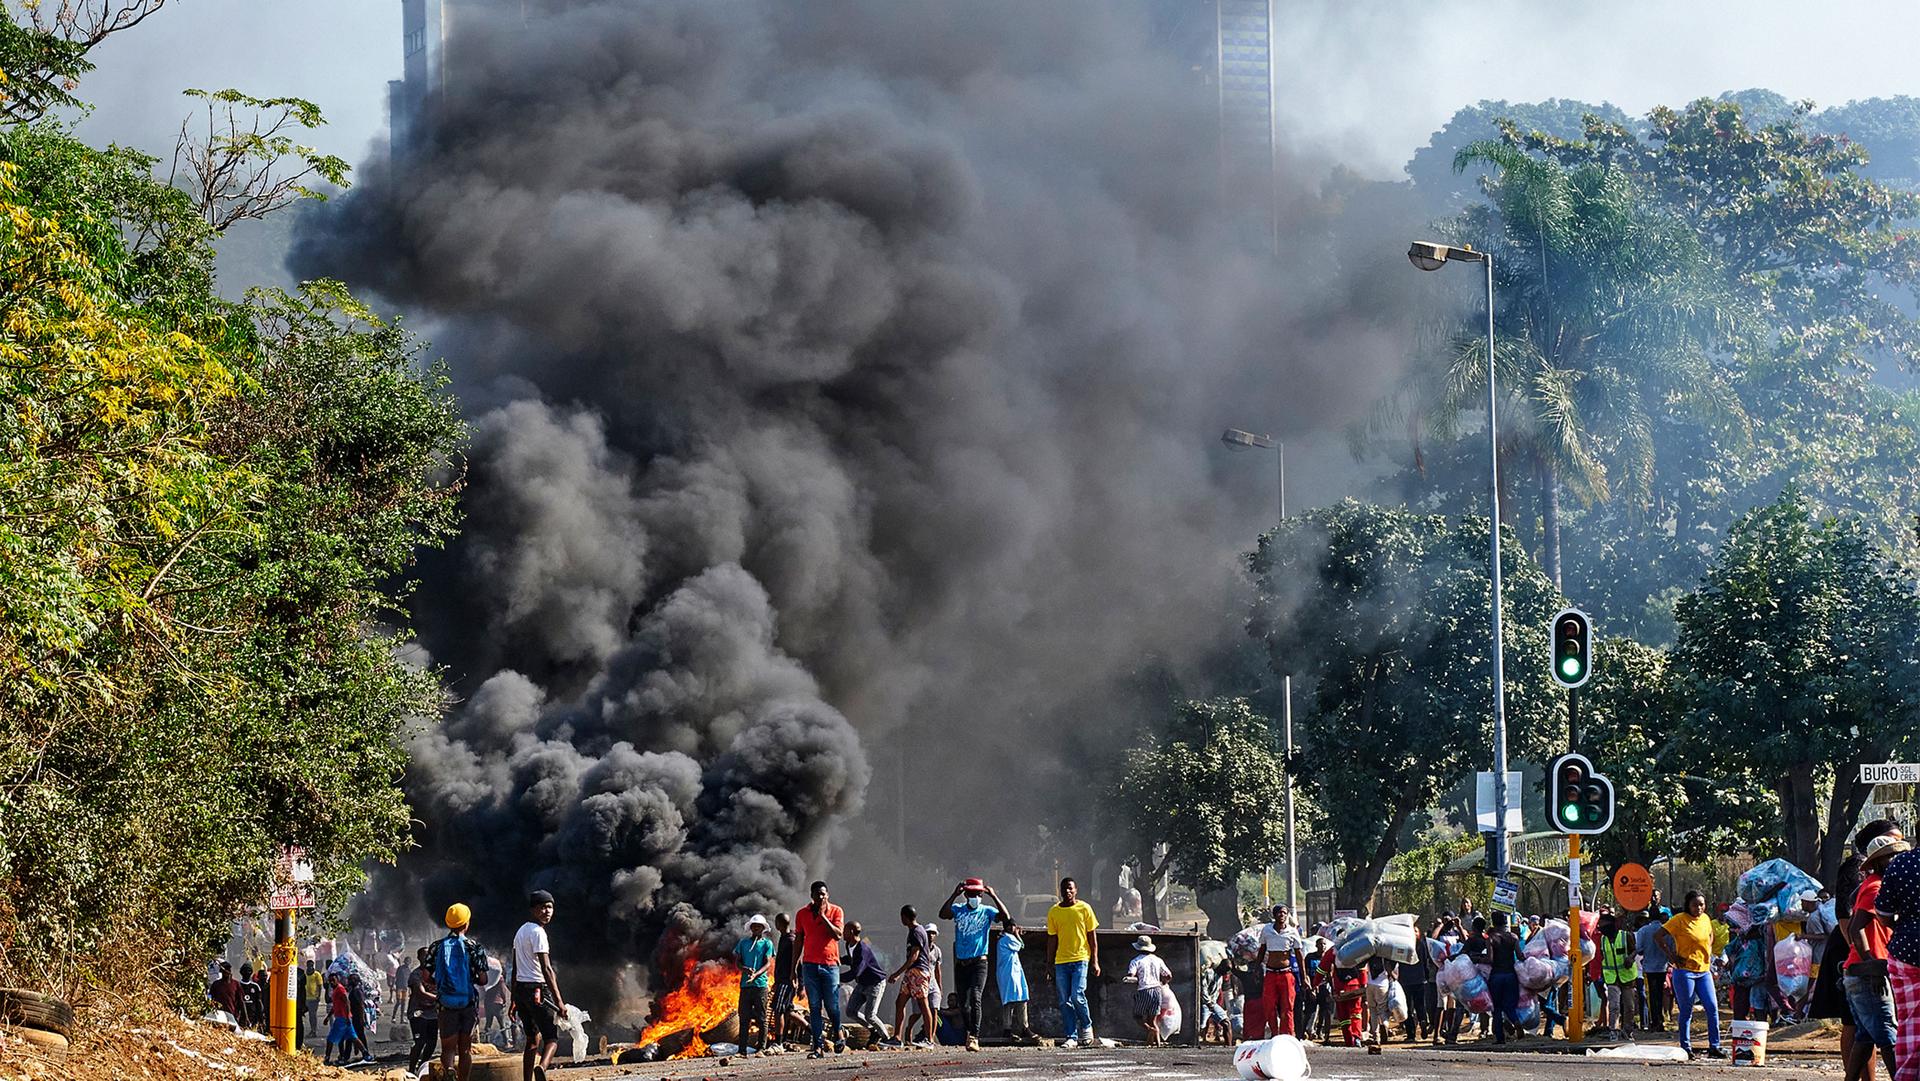 Looters outside a shopping centre alongside a burning barricade in Durban, South Africa